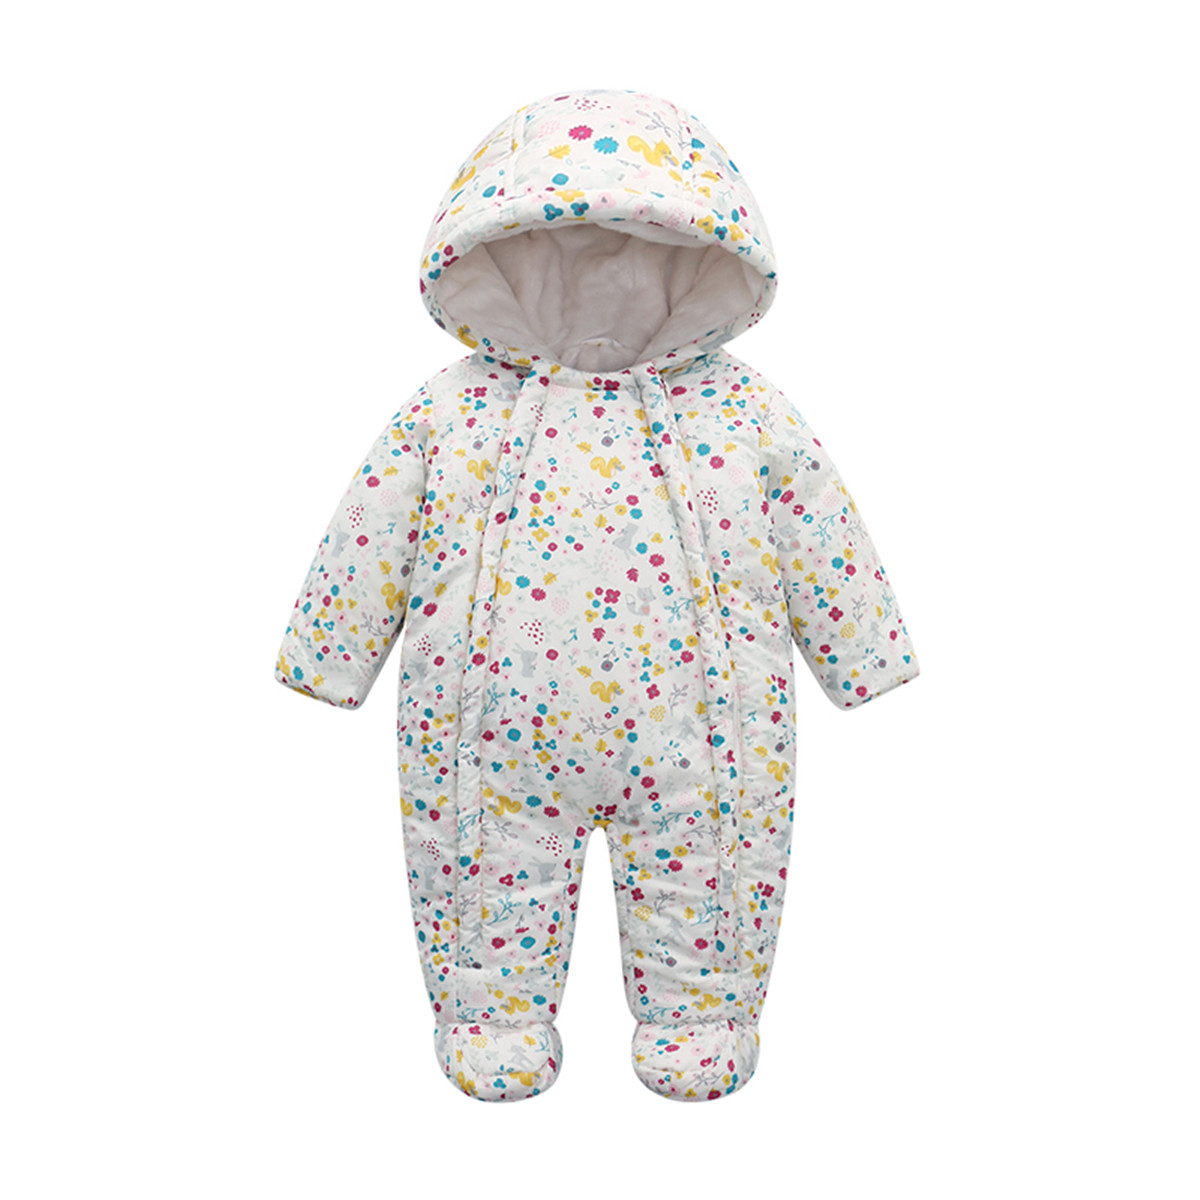 Newborn Baby Girls Winter Coat Outwear Plus Velvet Thickening Soft Fleece Rompers Infant Jumpsuit Overalls For Kids Clothes